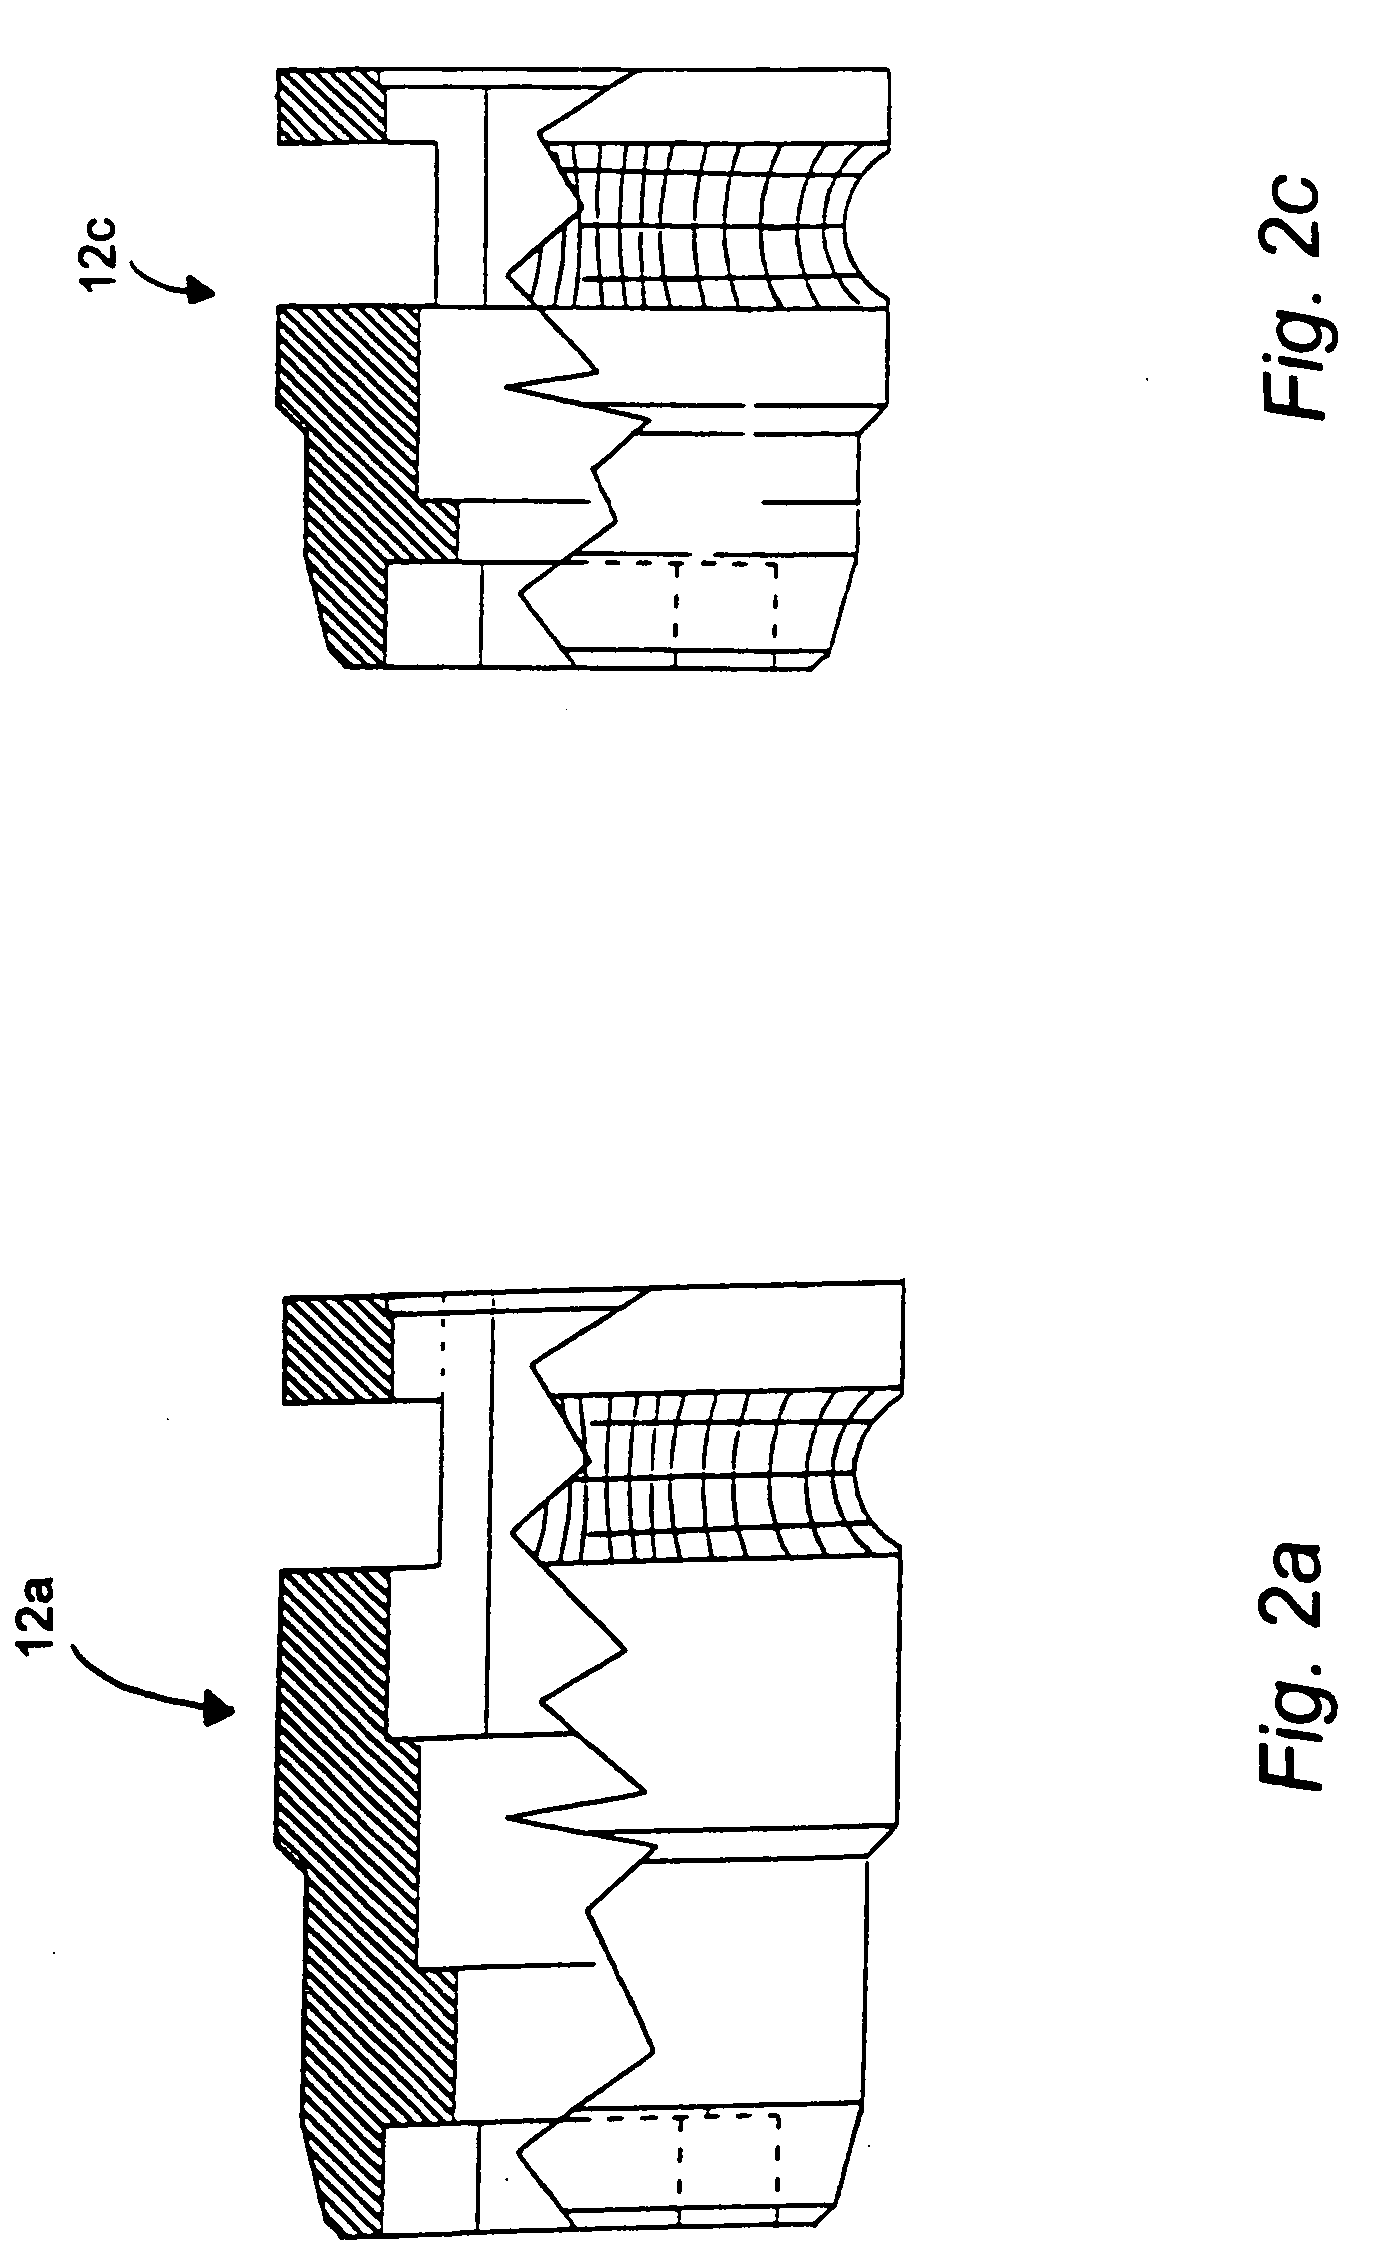 Implant delivery system